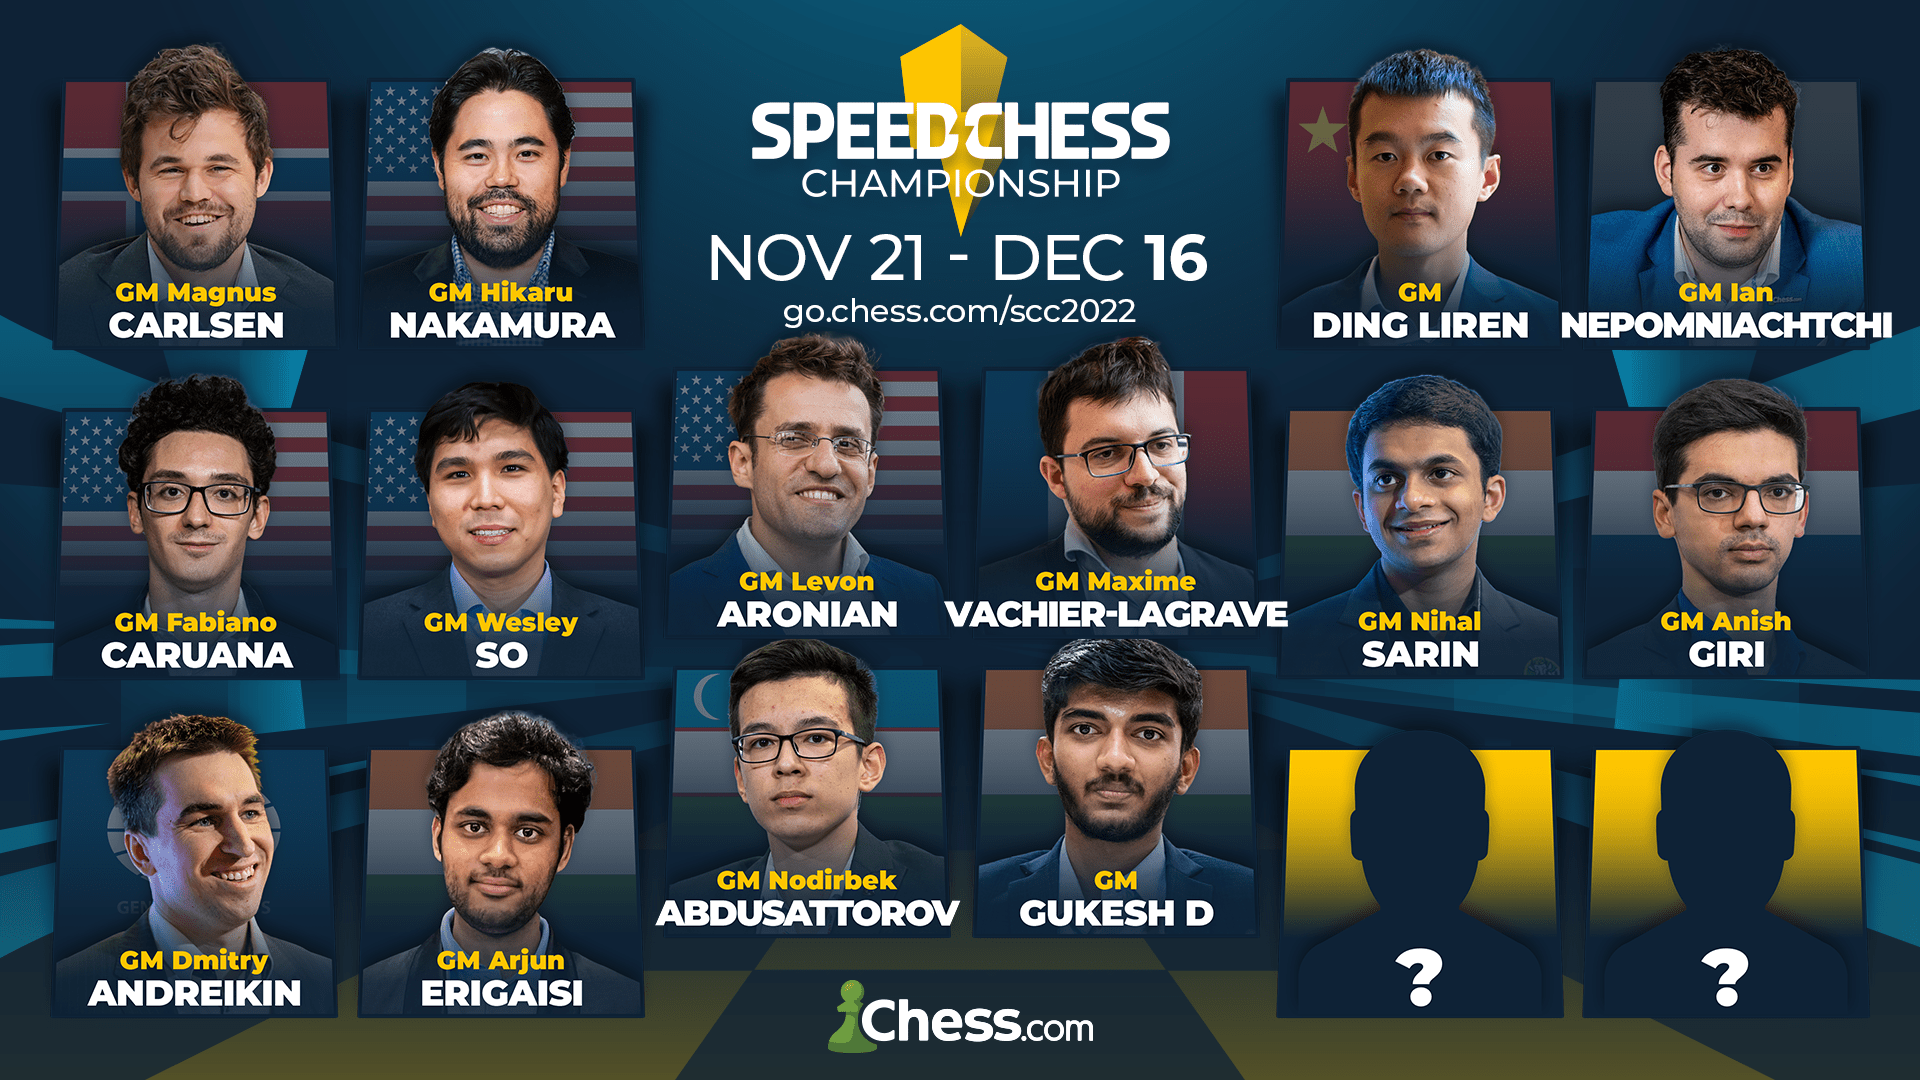 Speed Chess Championship 2018  Official Information 